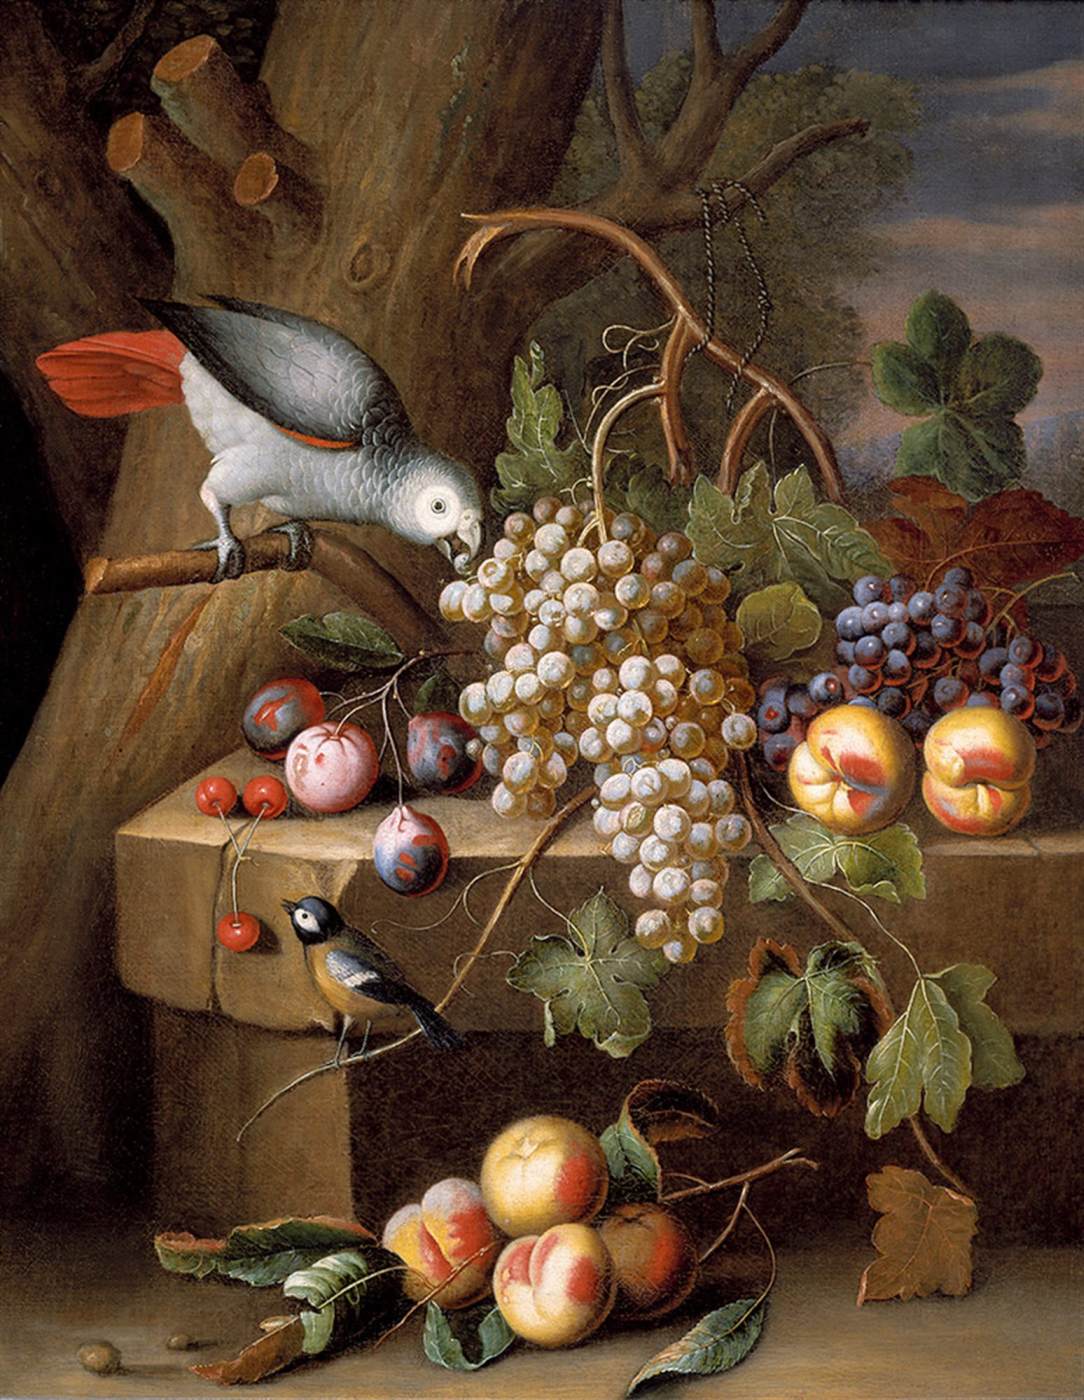 Netrega with Fruits and Birds